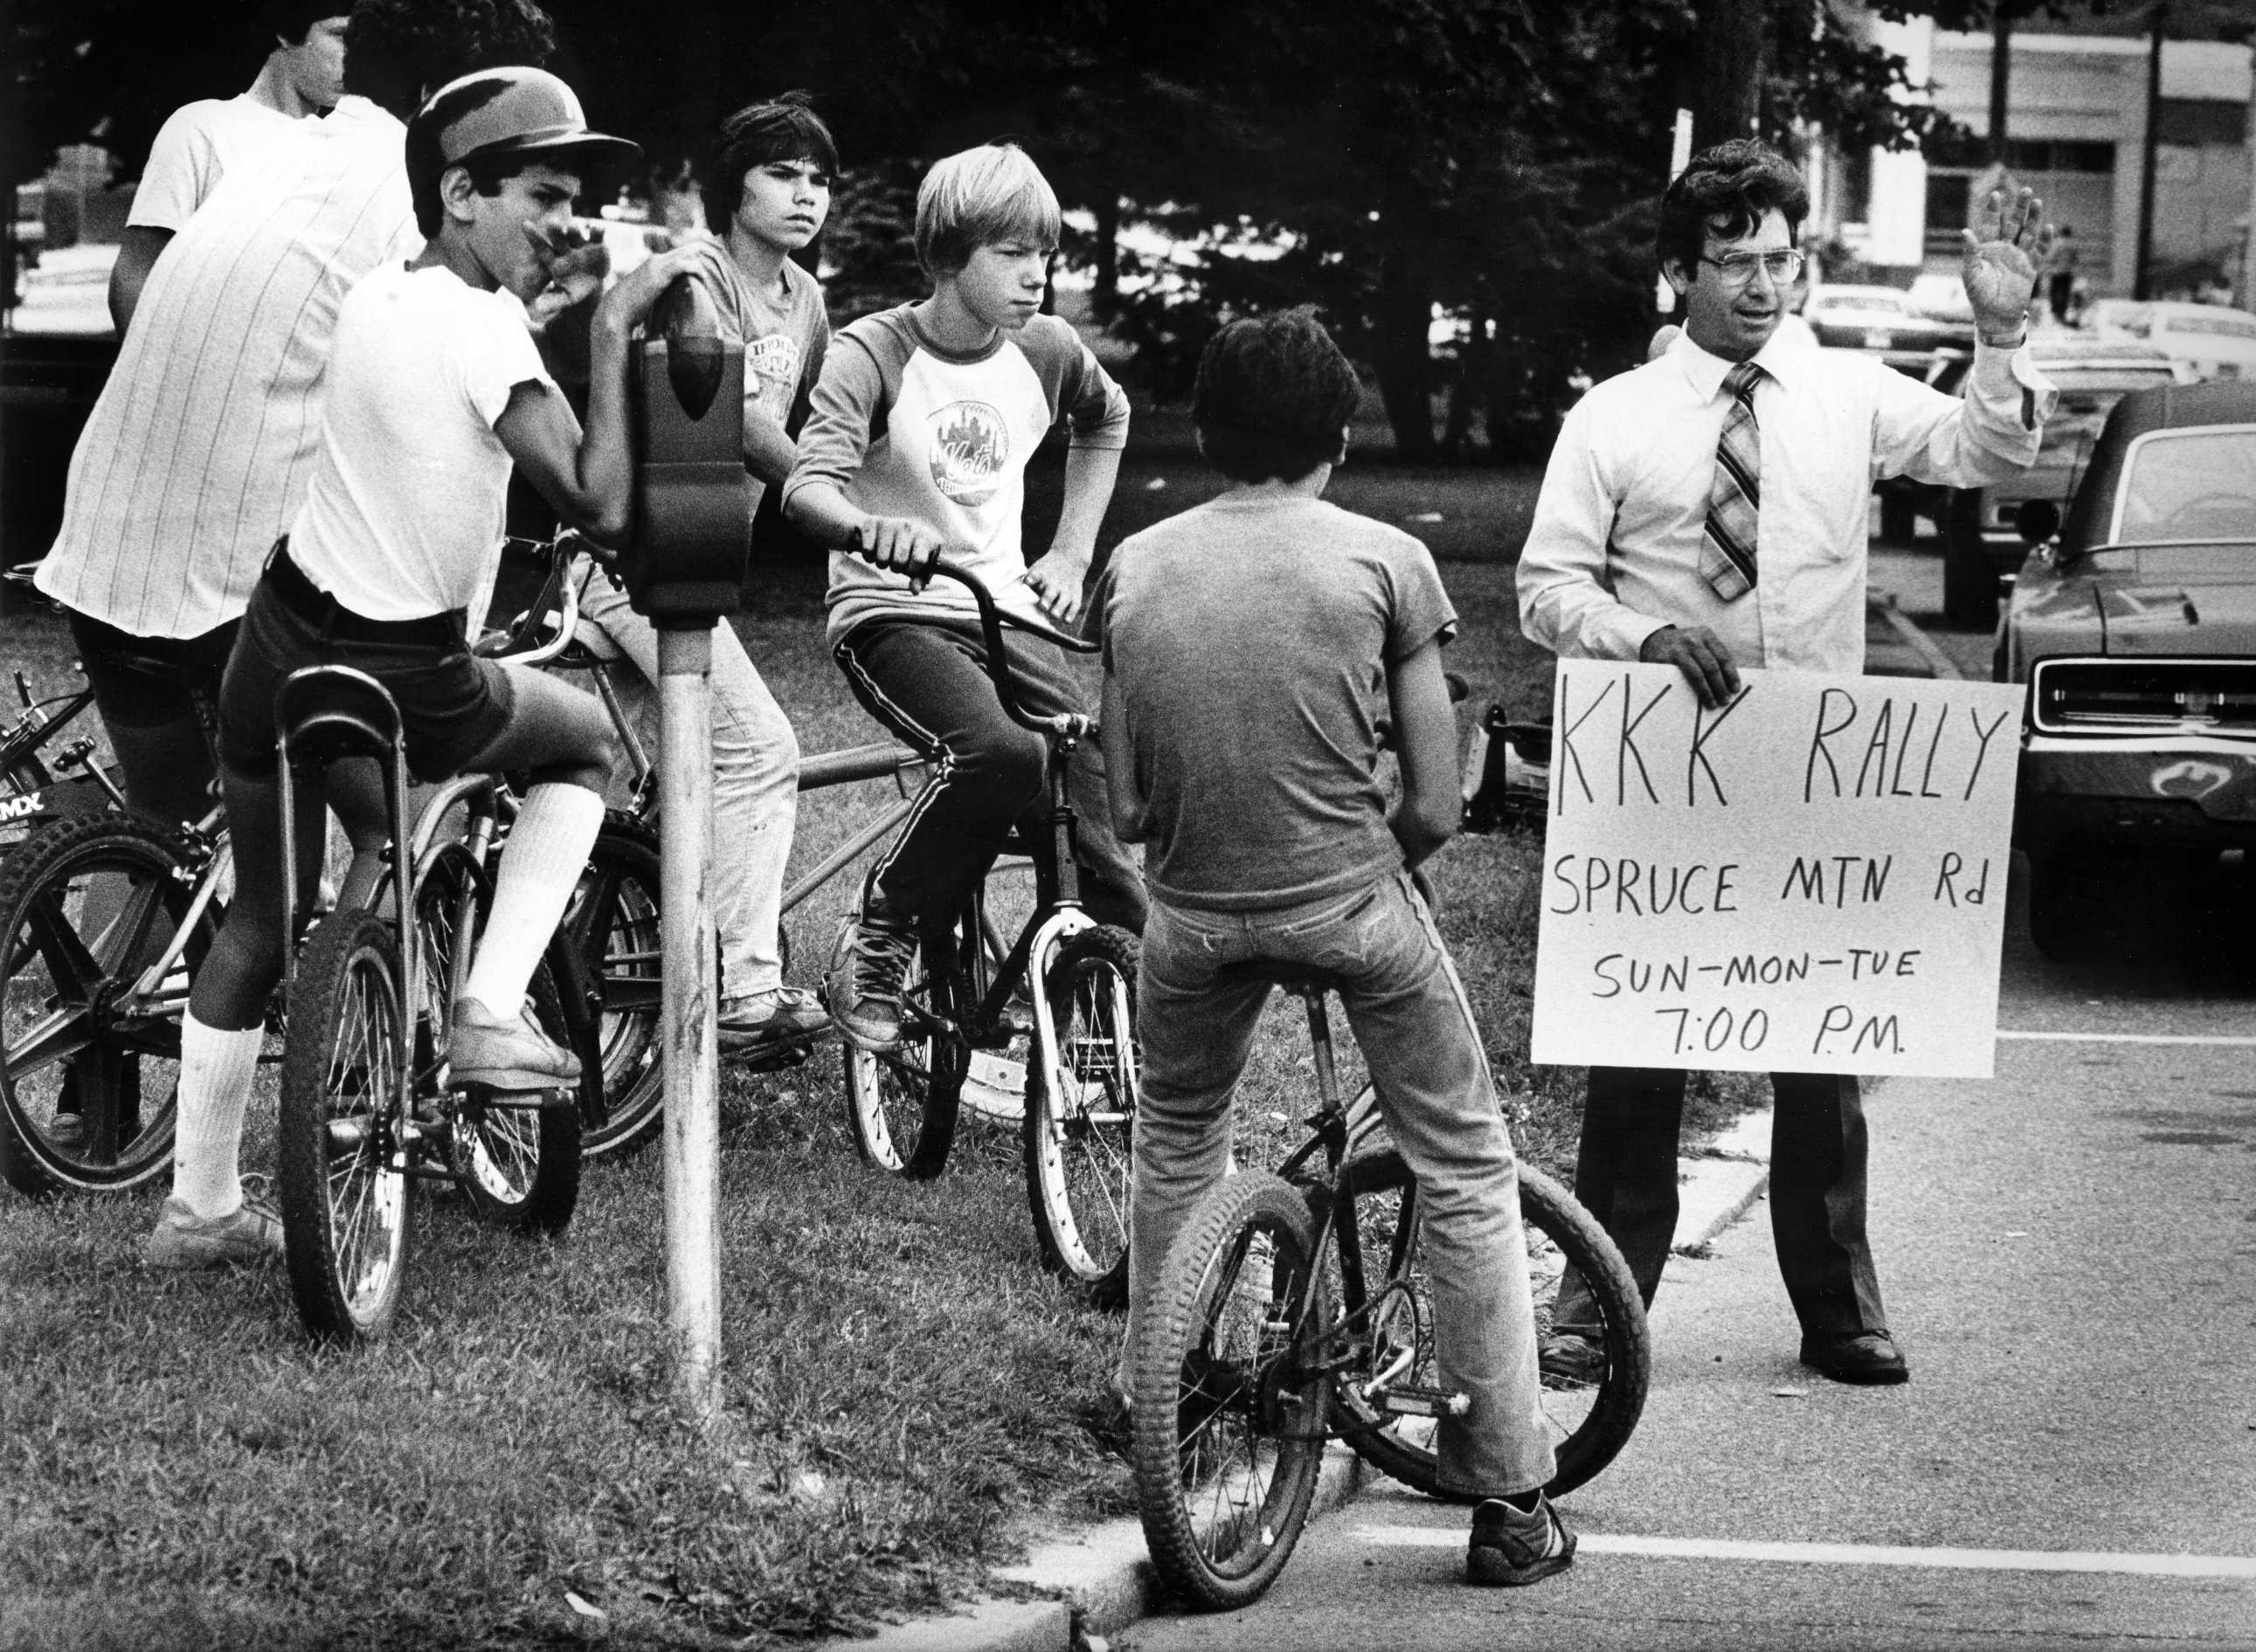 Racial tensions are exposed when the KKK plans a rally in Danbury. 1982